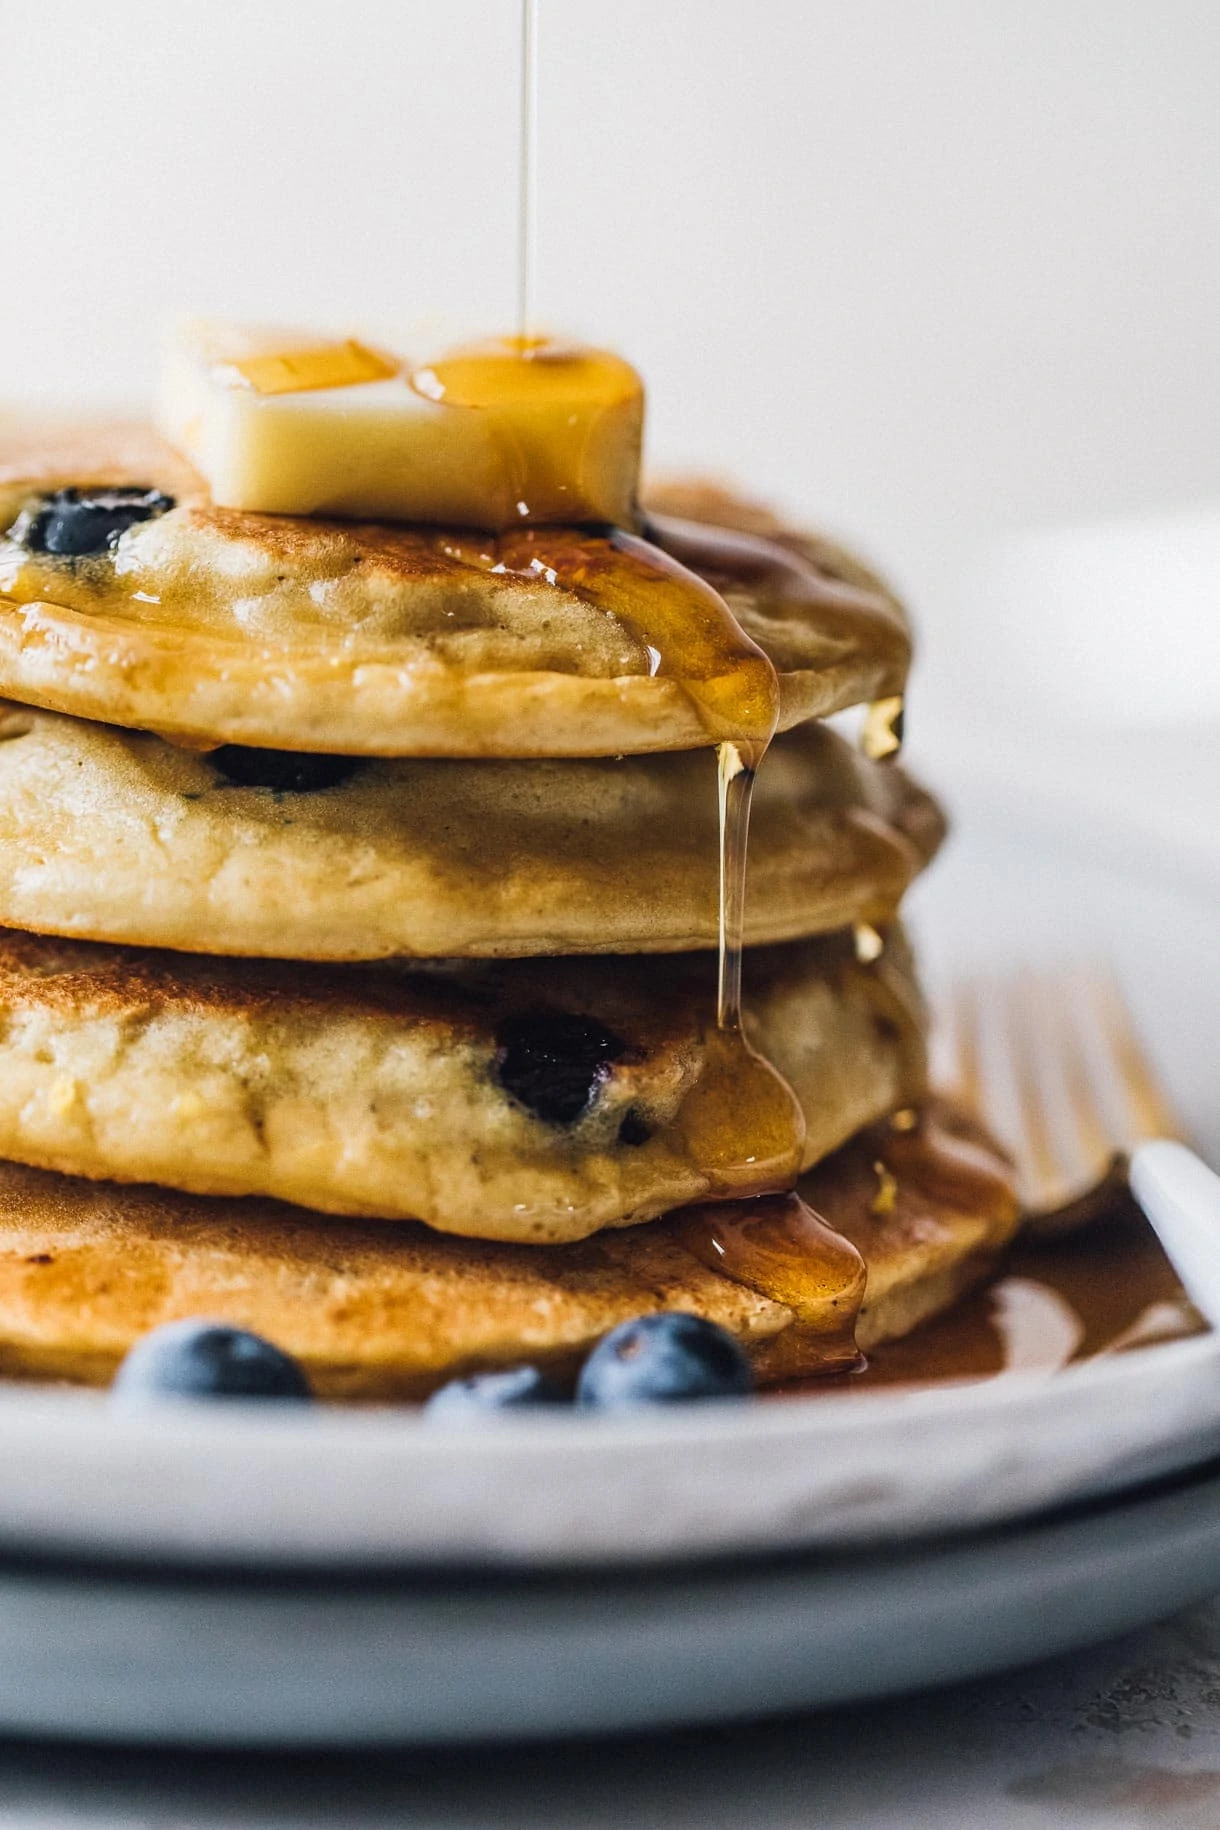 blueberry pancakes dripping with maple syrup